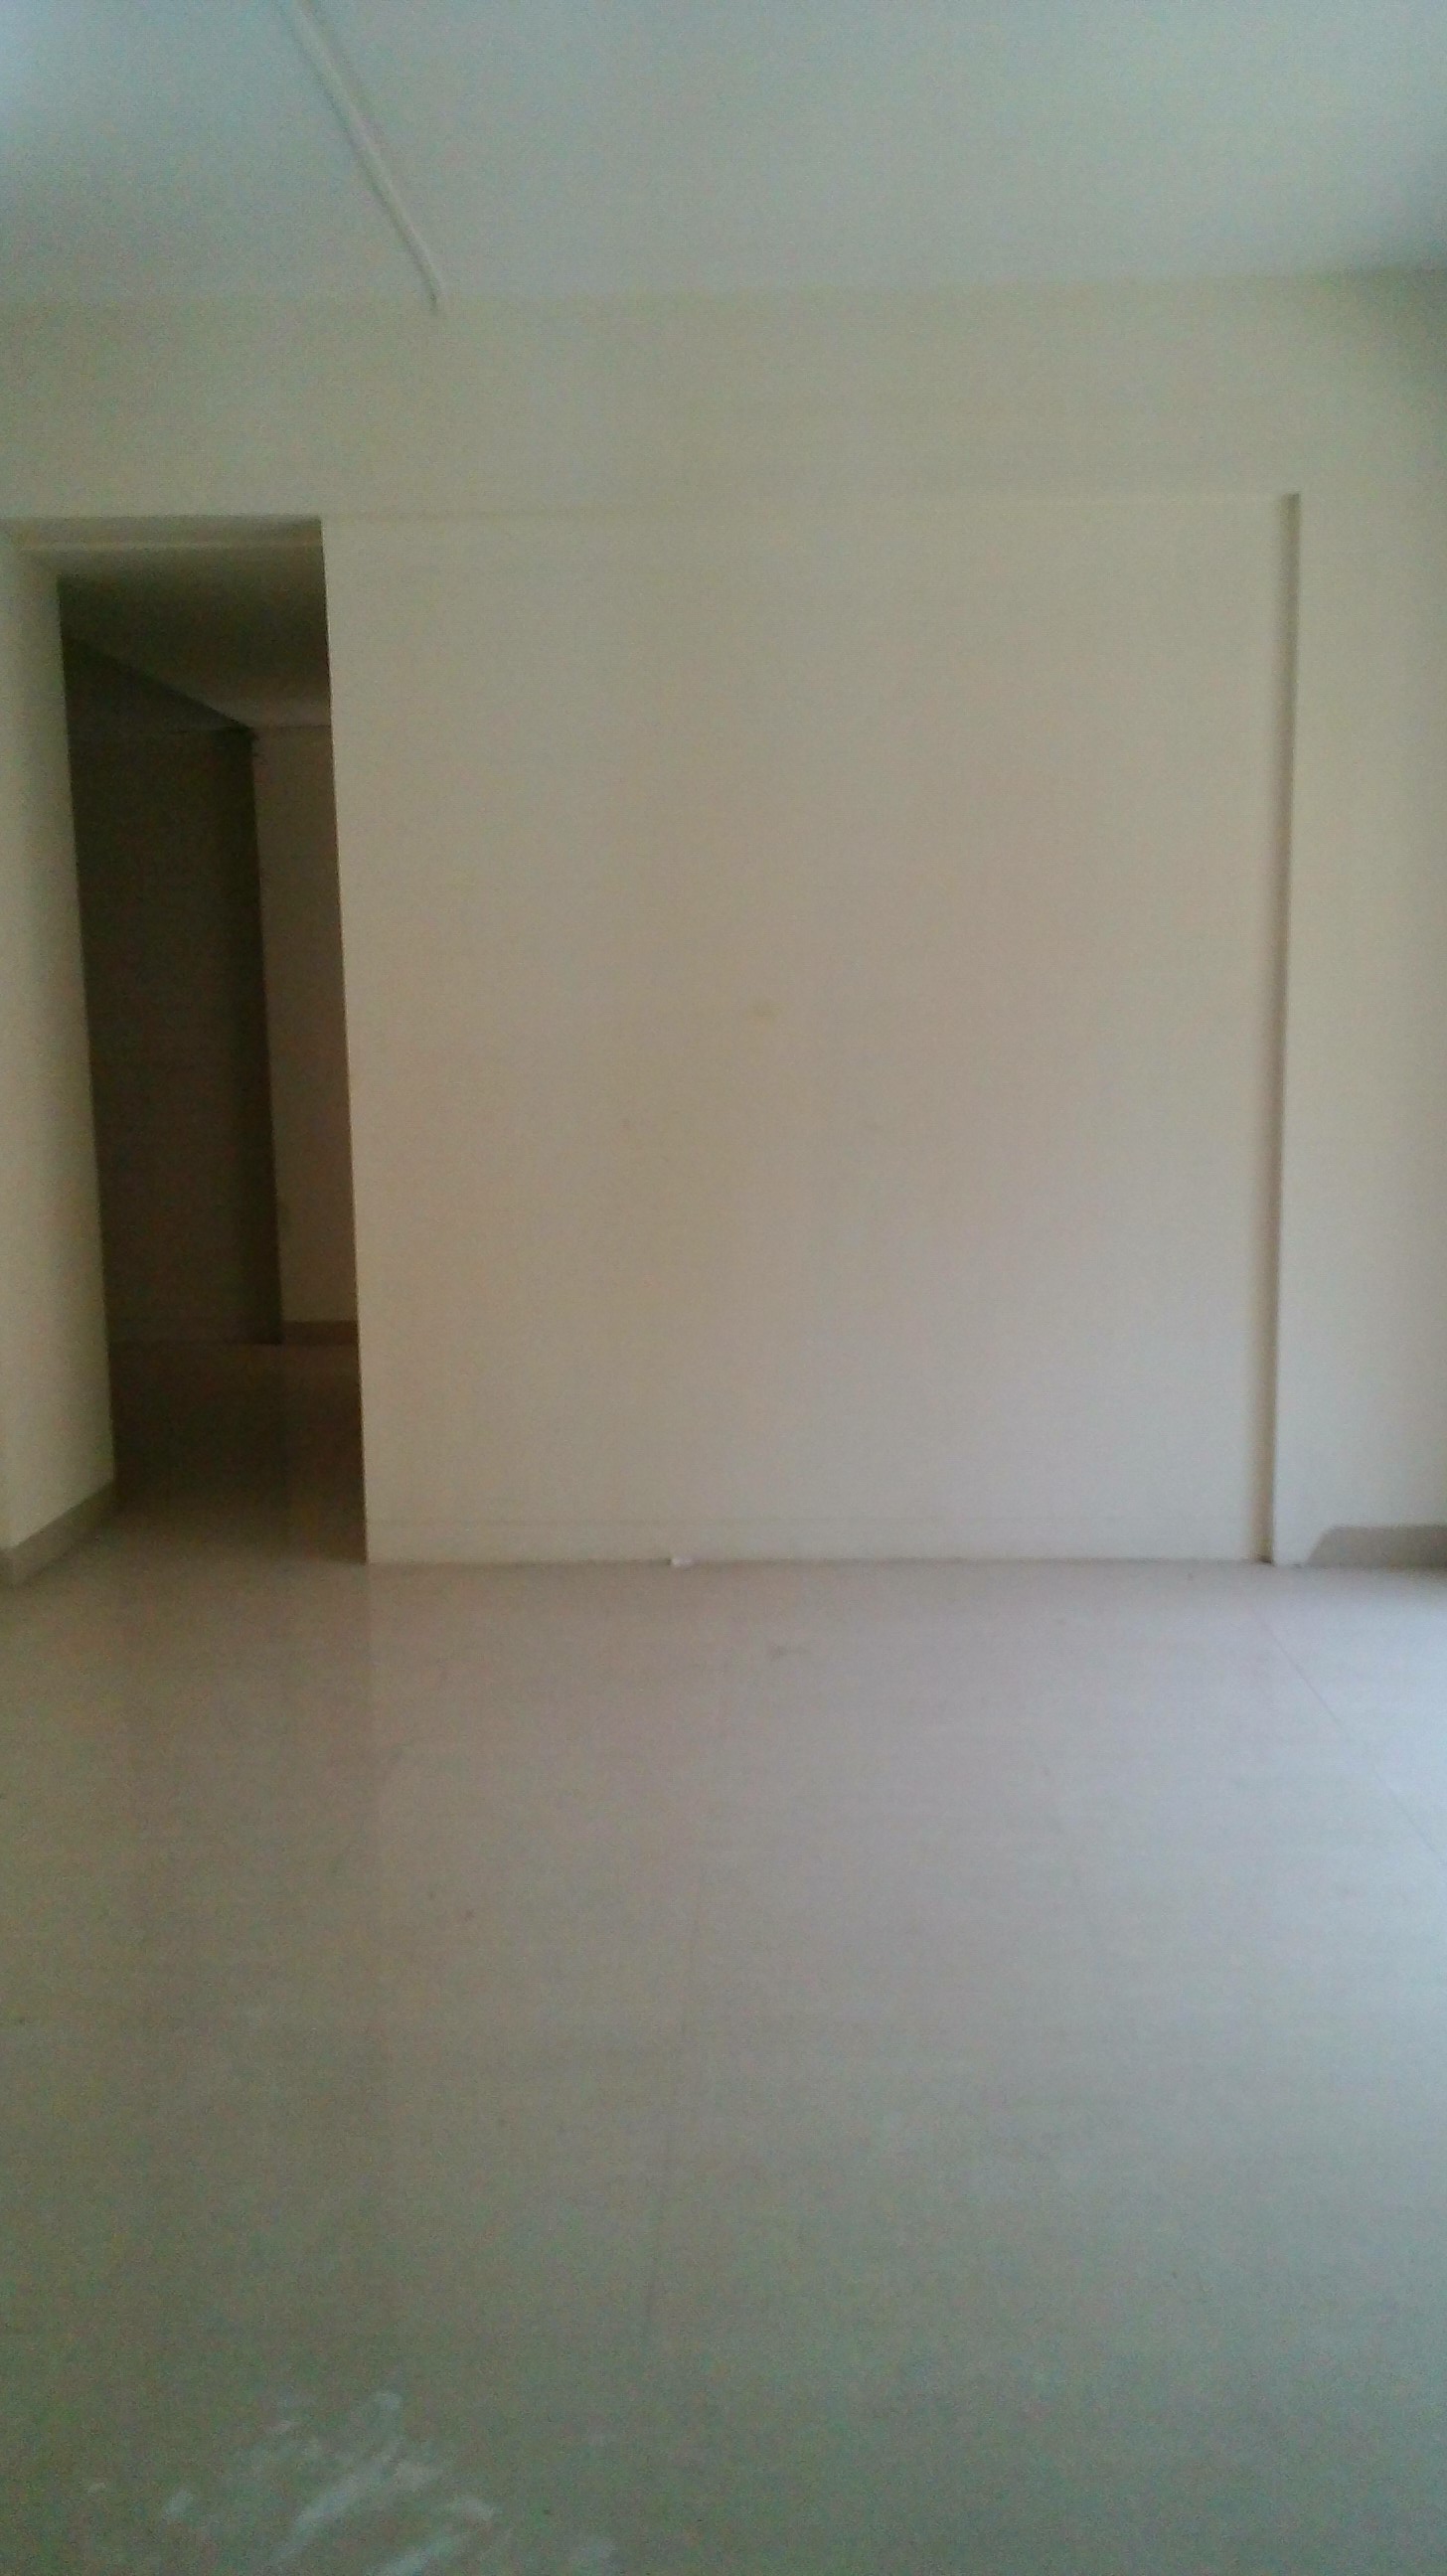 Commercial Office Space for Rent in Commercial office space for Rent Near Teen Petrol Pump,, Thane-West, Mumbai